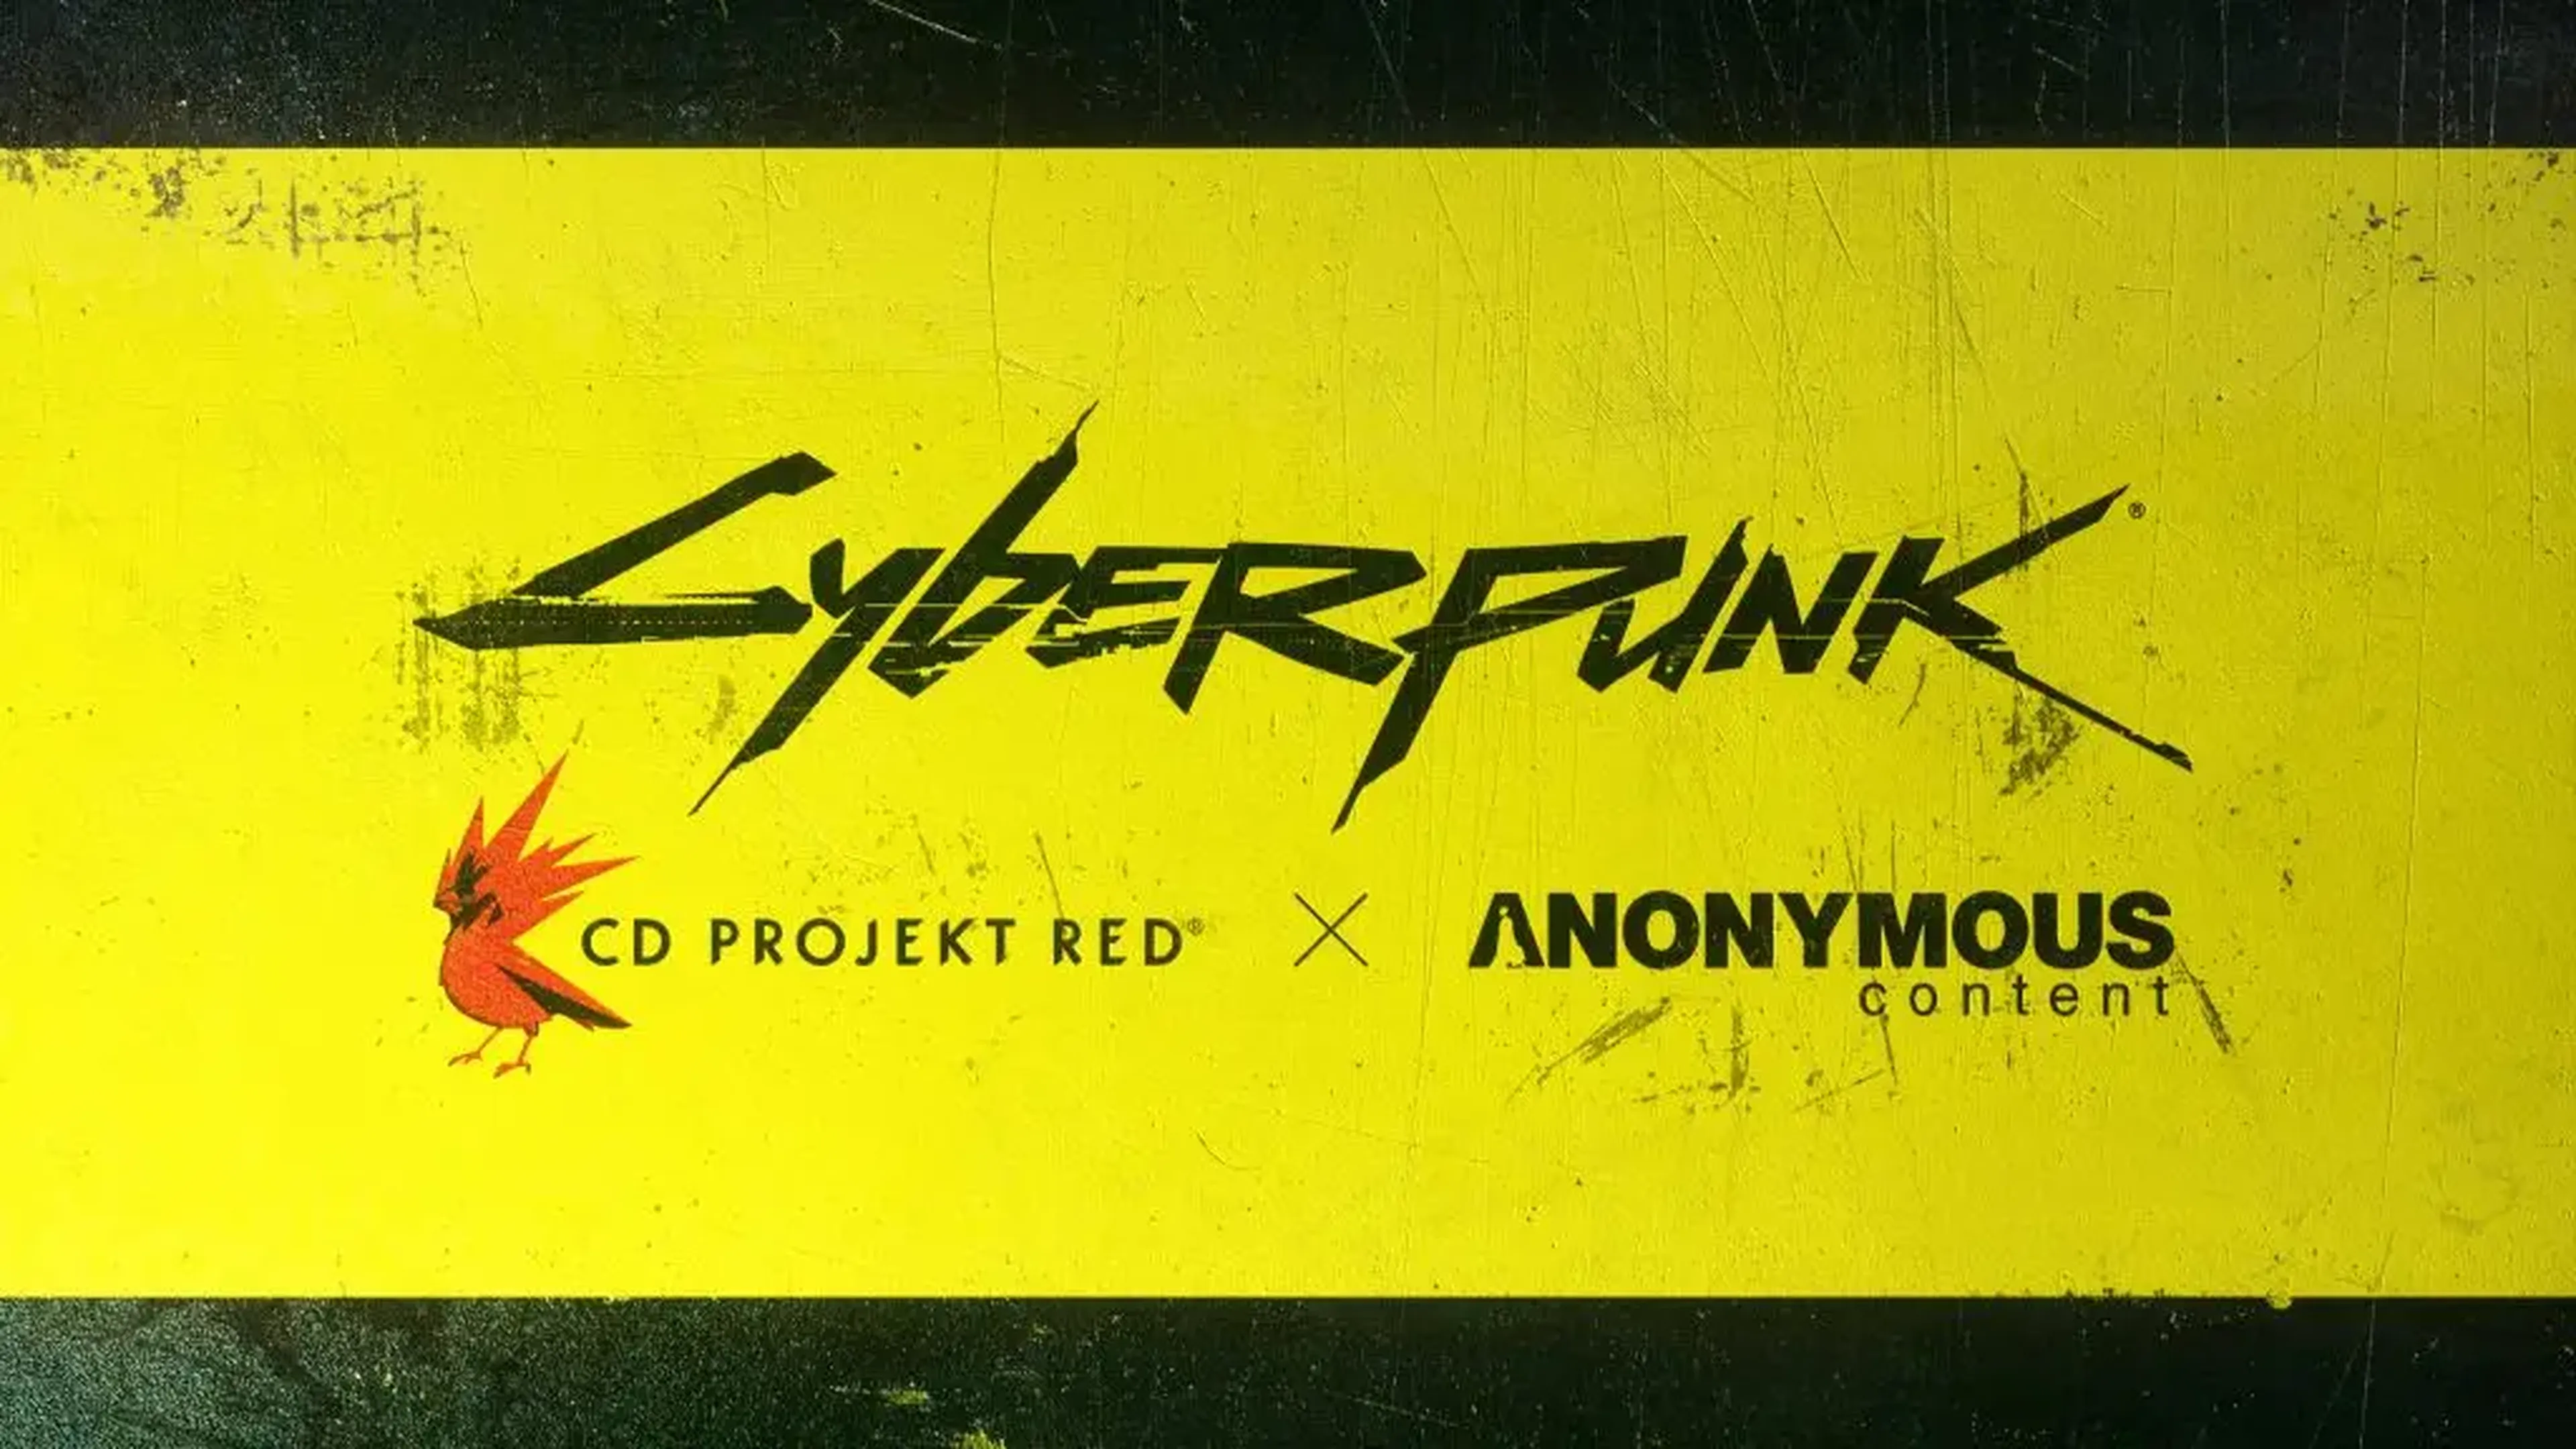 CD Projekt RED Anonymous